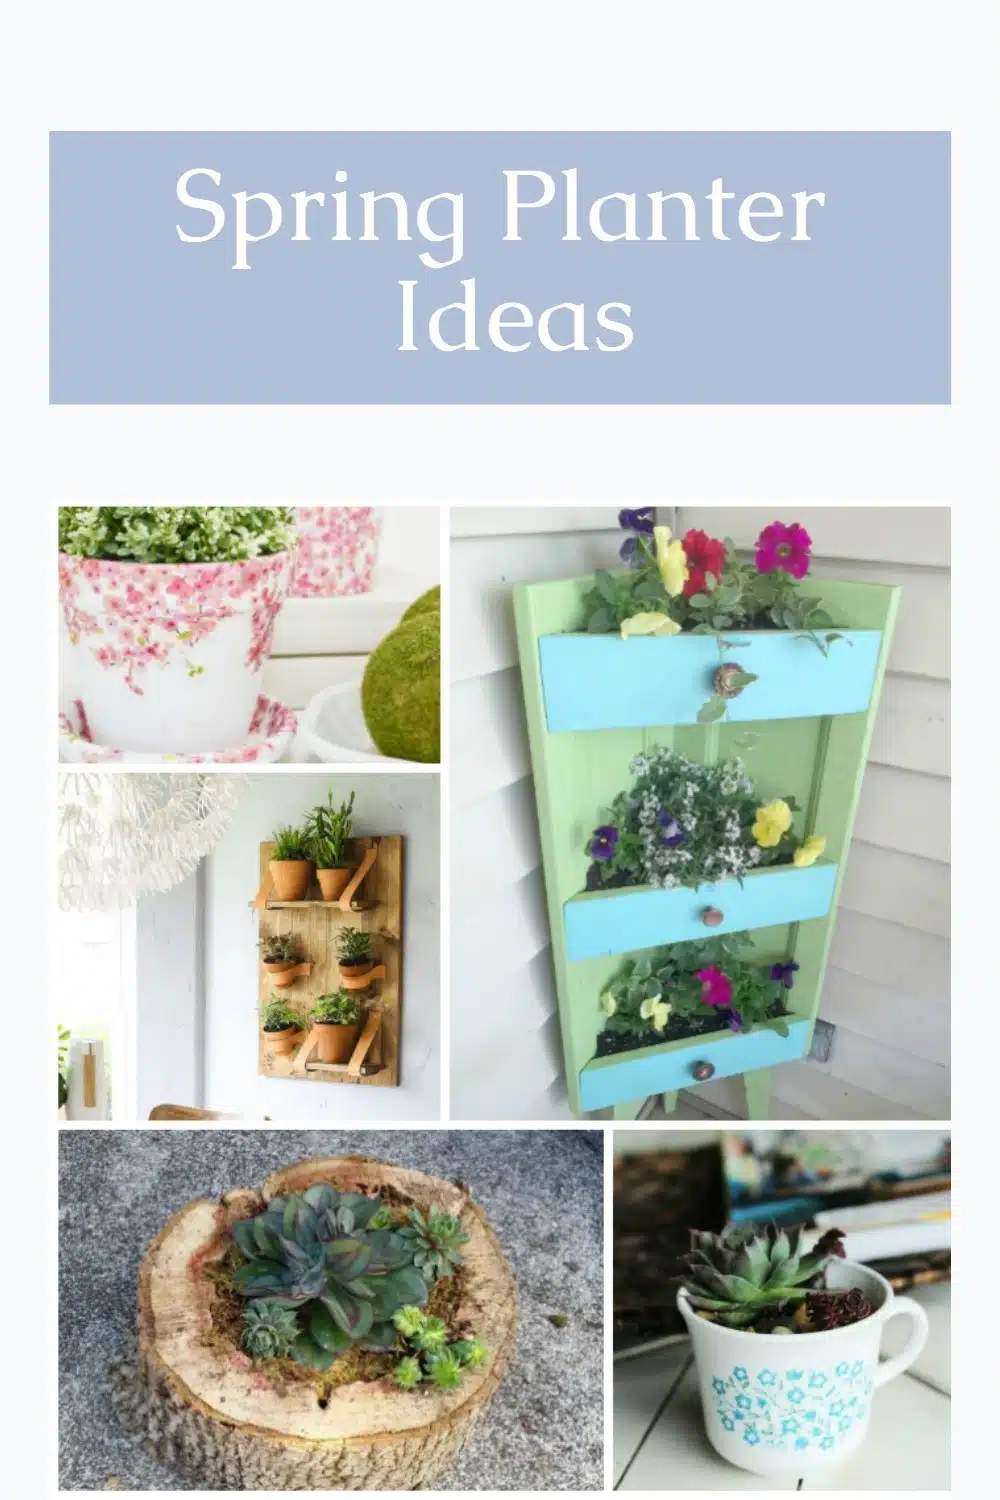 So many fun and unique planter ideas for Spring and Summer. Ideas to build your own simple planters, or repurpose items you probably have on hand. Something for everyone in this collection of planter ideas. #MyRepurposedLife #planters #repurposed #diy #beginners #intermediate #junky via @repurposedlife